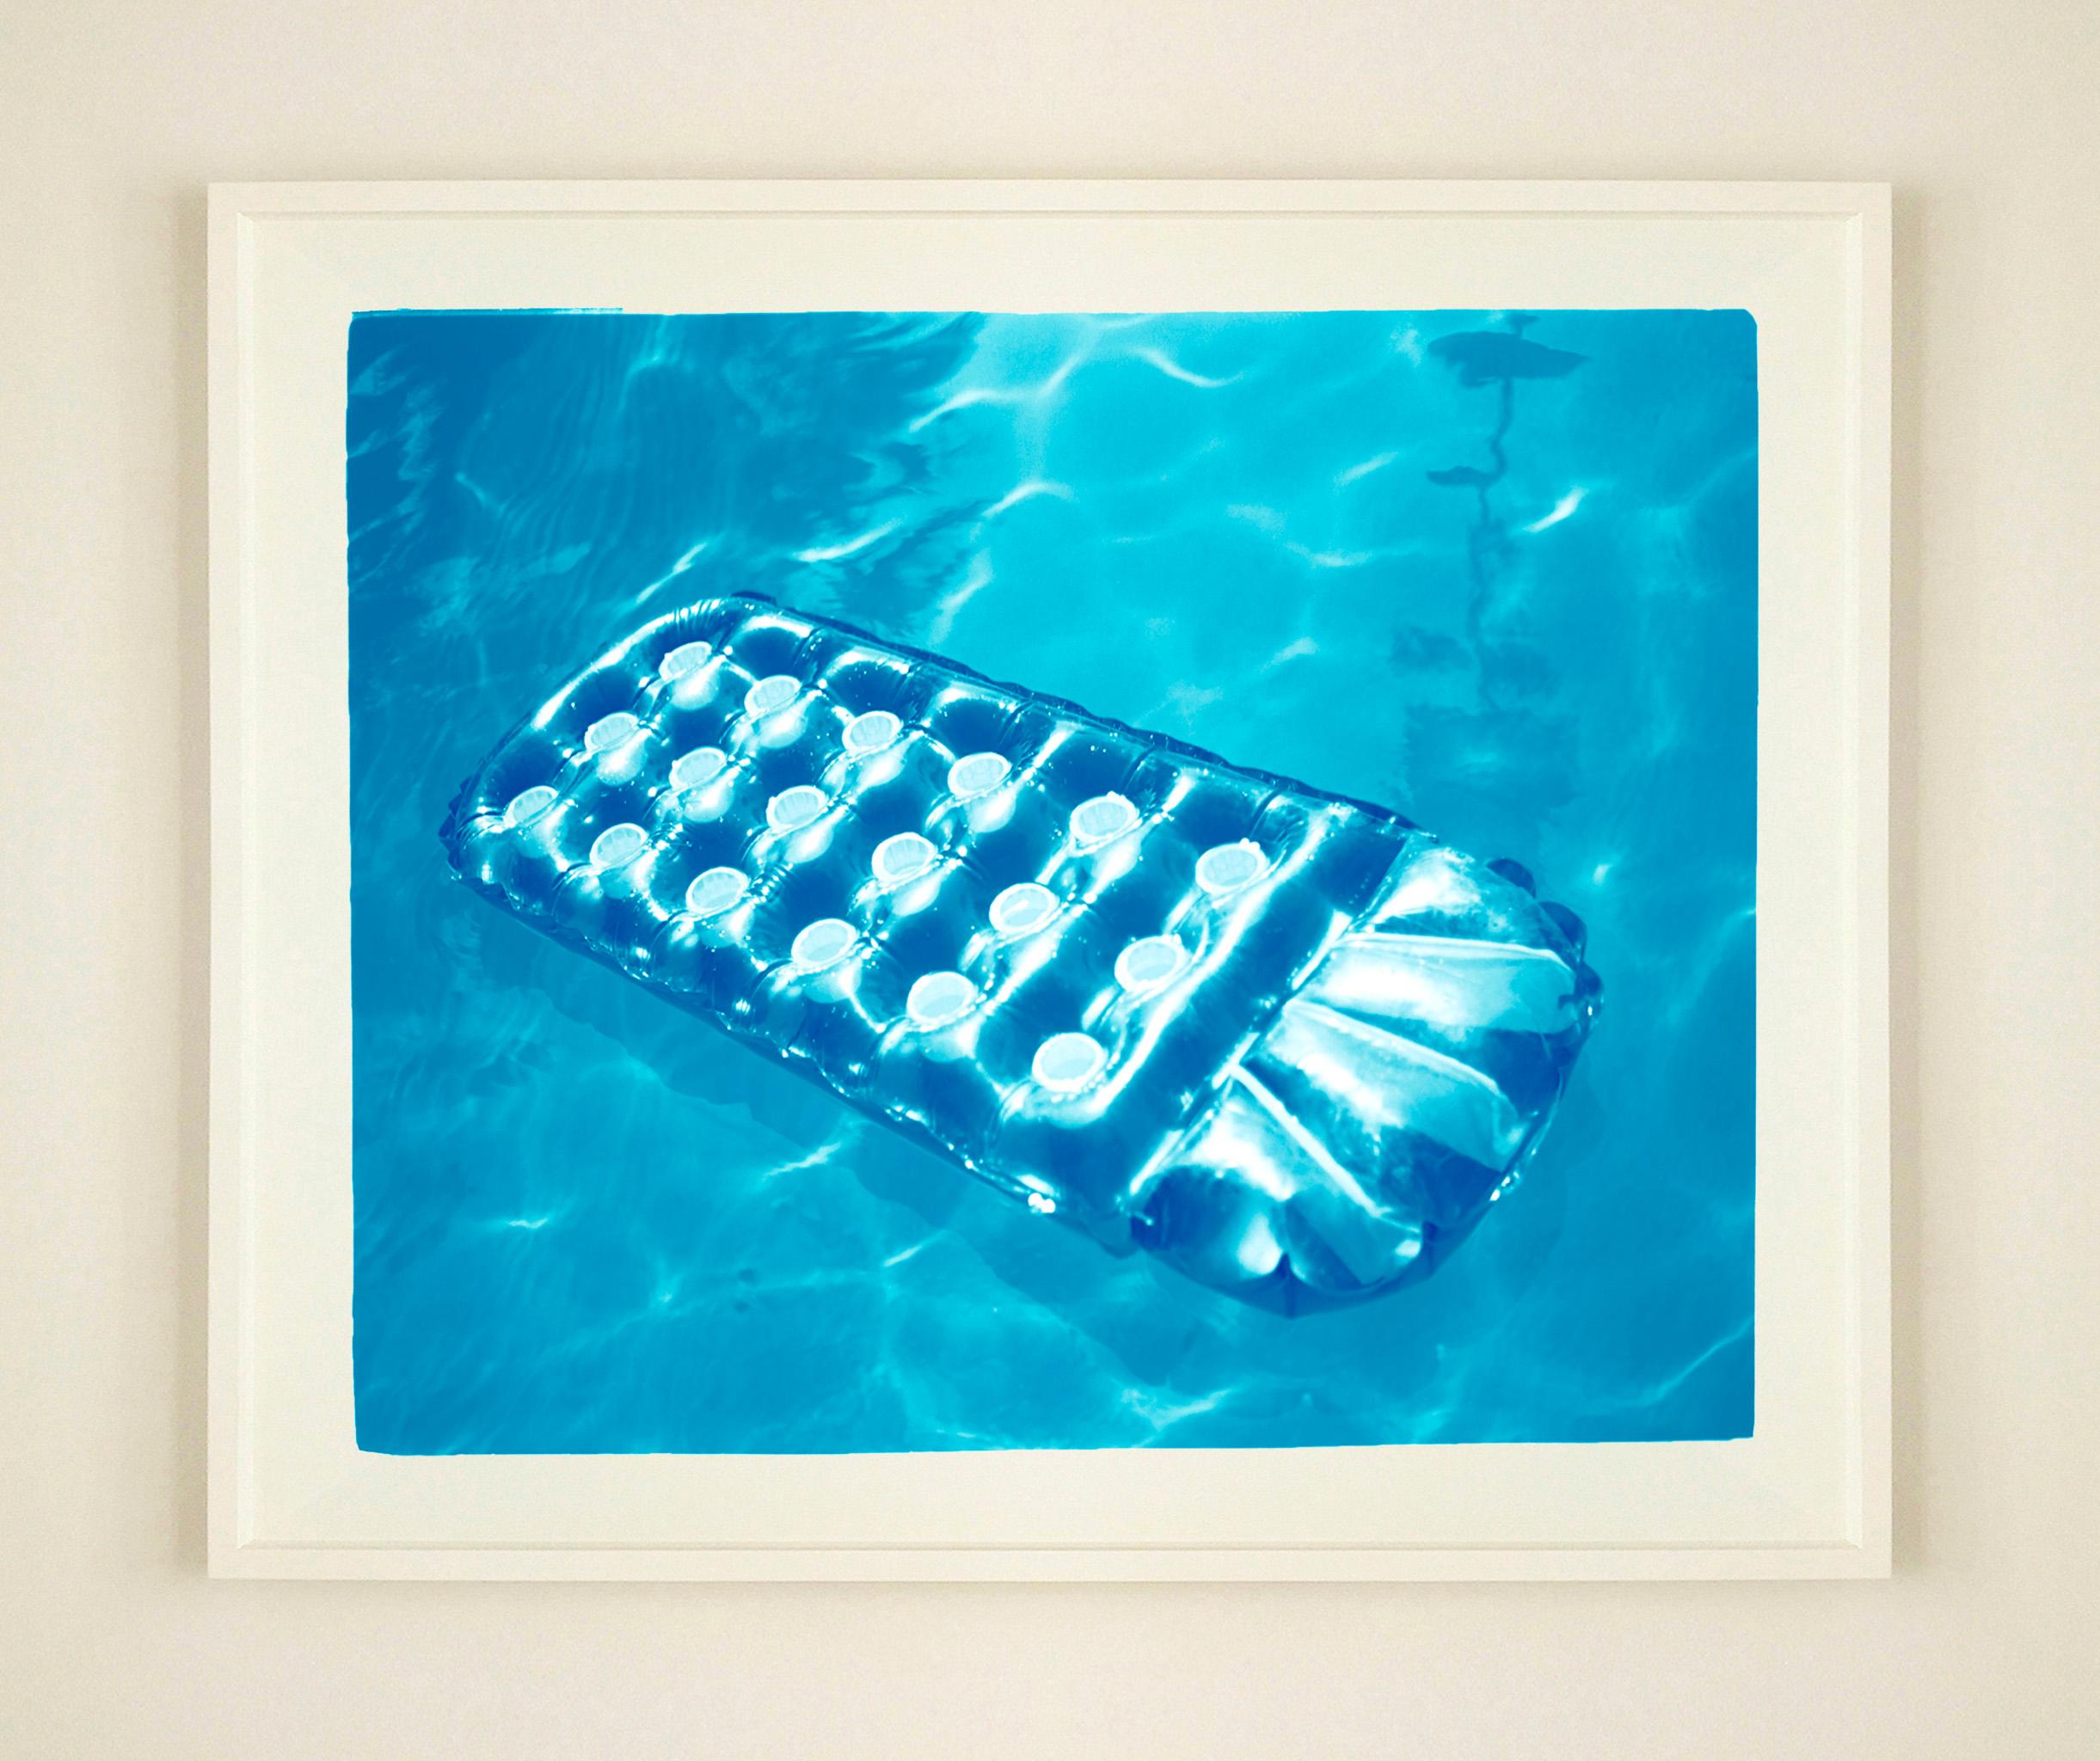 Sun Lounger, Palm Springs photograph by Richard Heeps from his Dream in Color series.
There is something idyllic about the blue pool water and the sun lounger just waiting for you.

This artwork is a limited edition of 25, gloss photographic print,